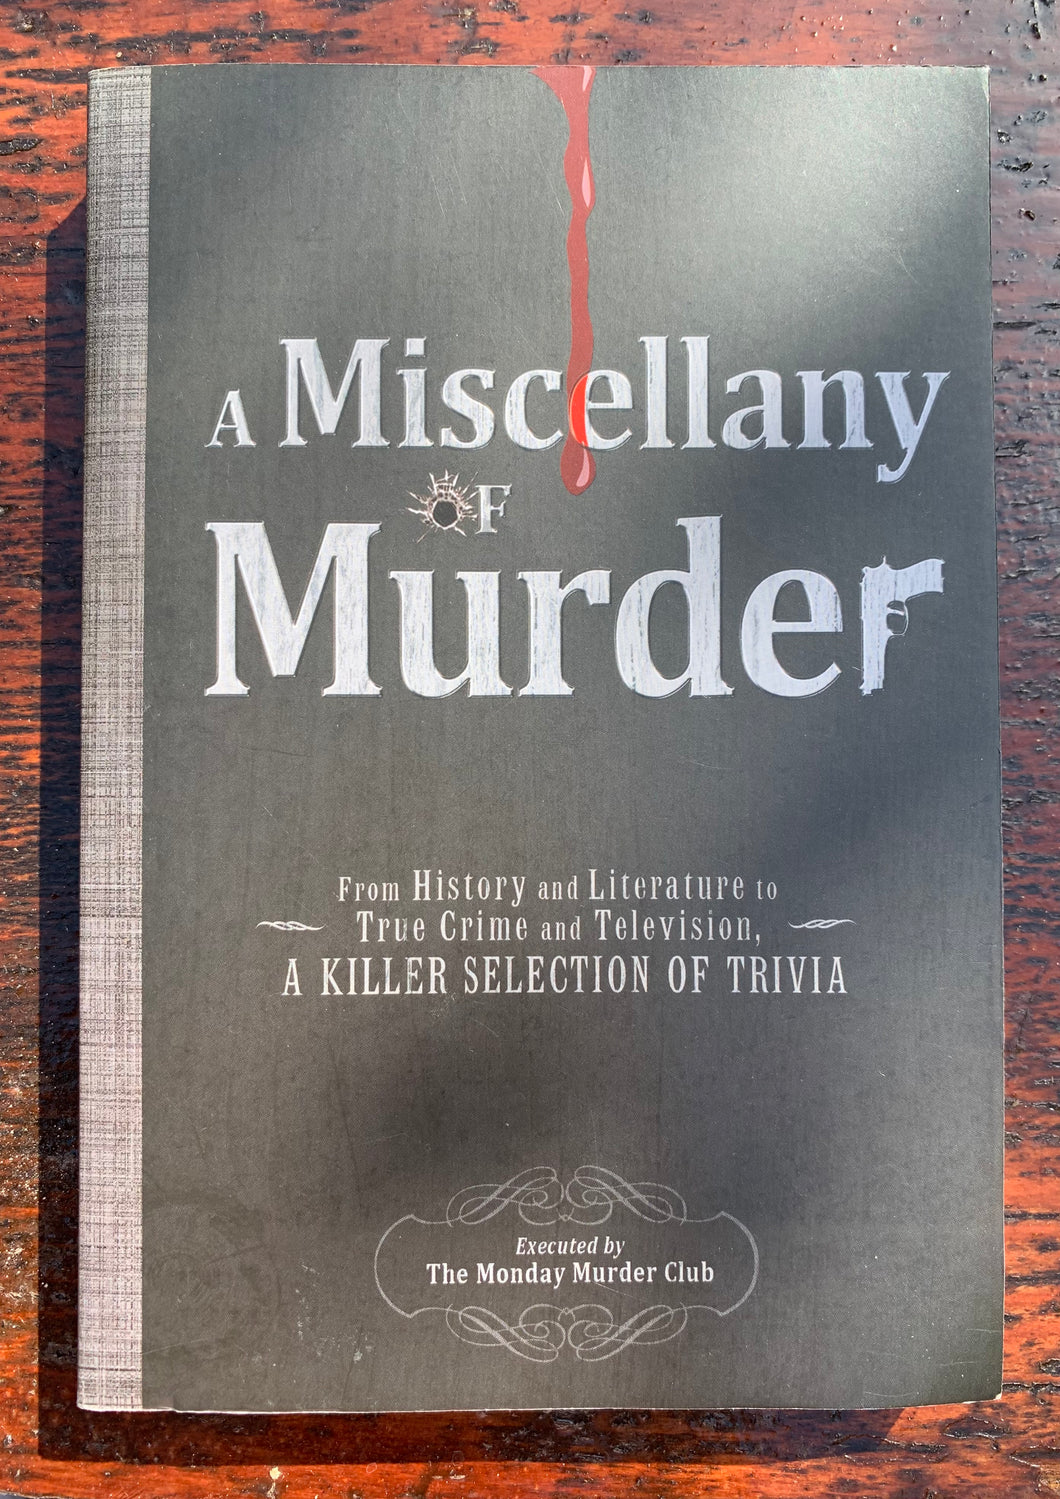 A Miscellany of Murder